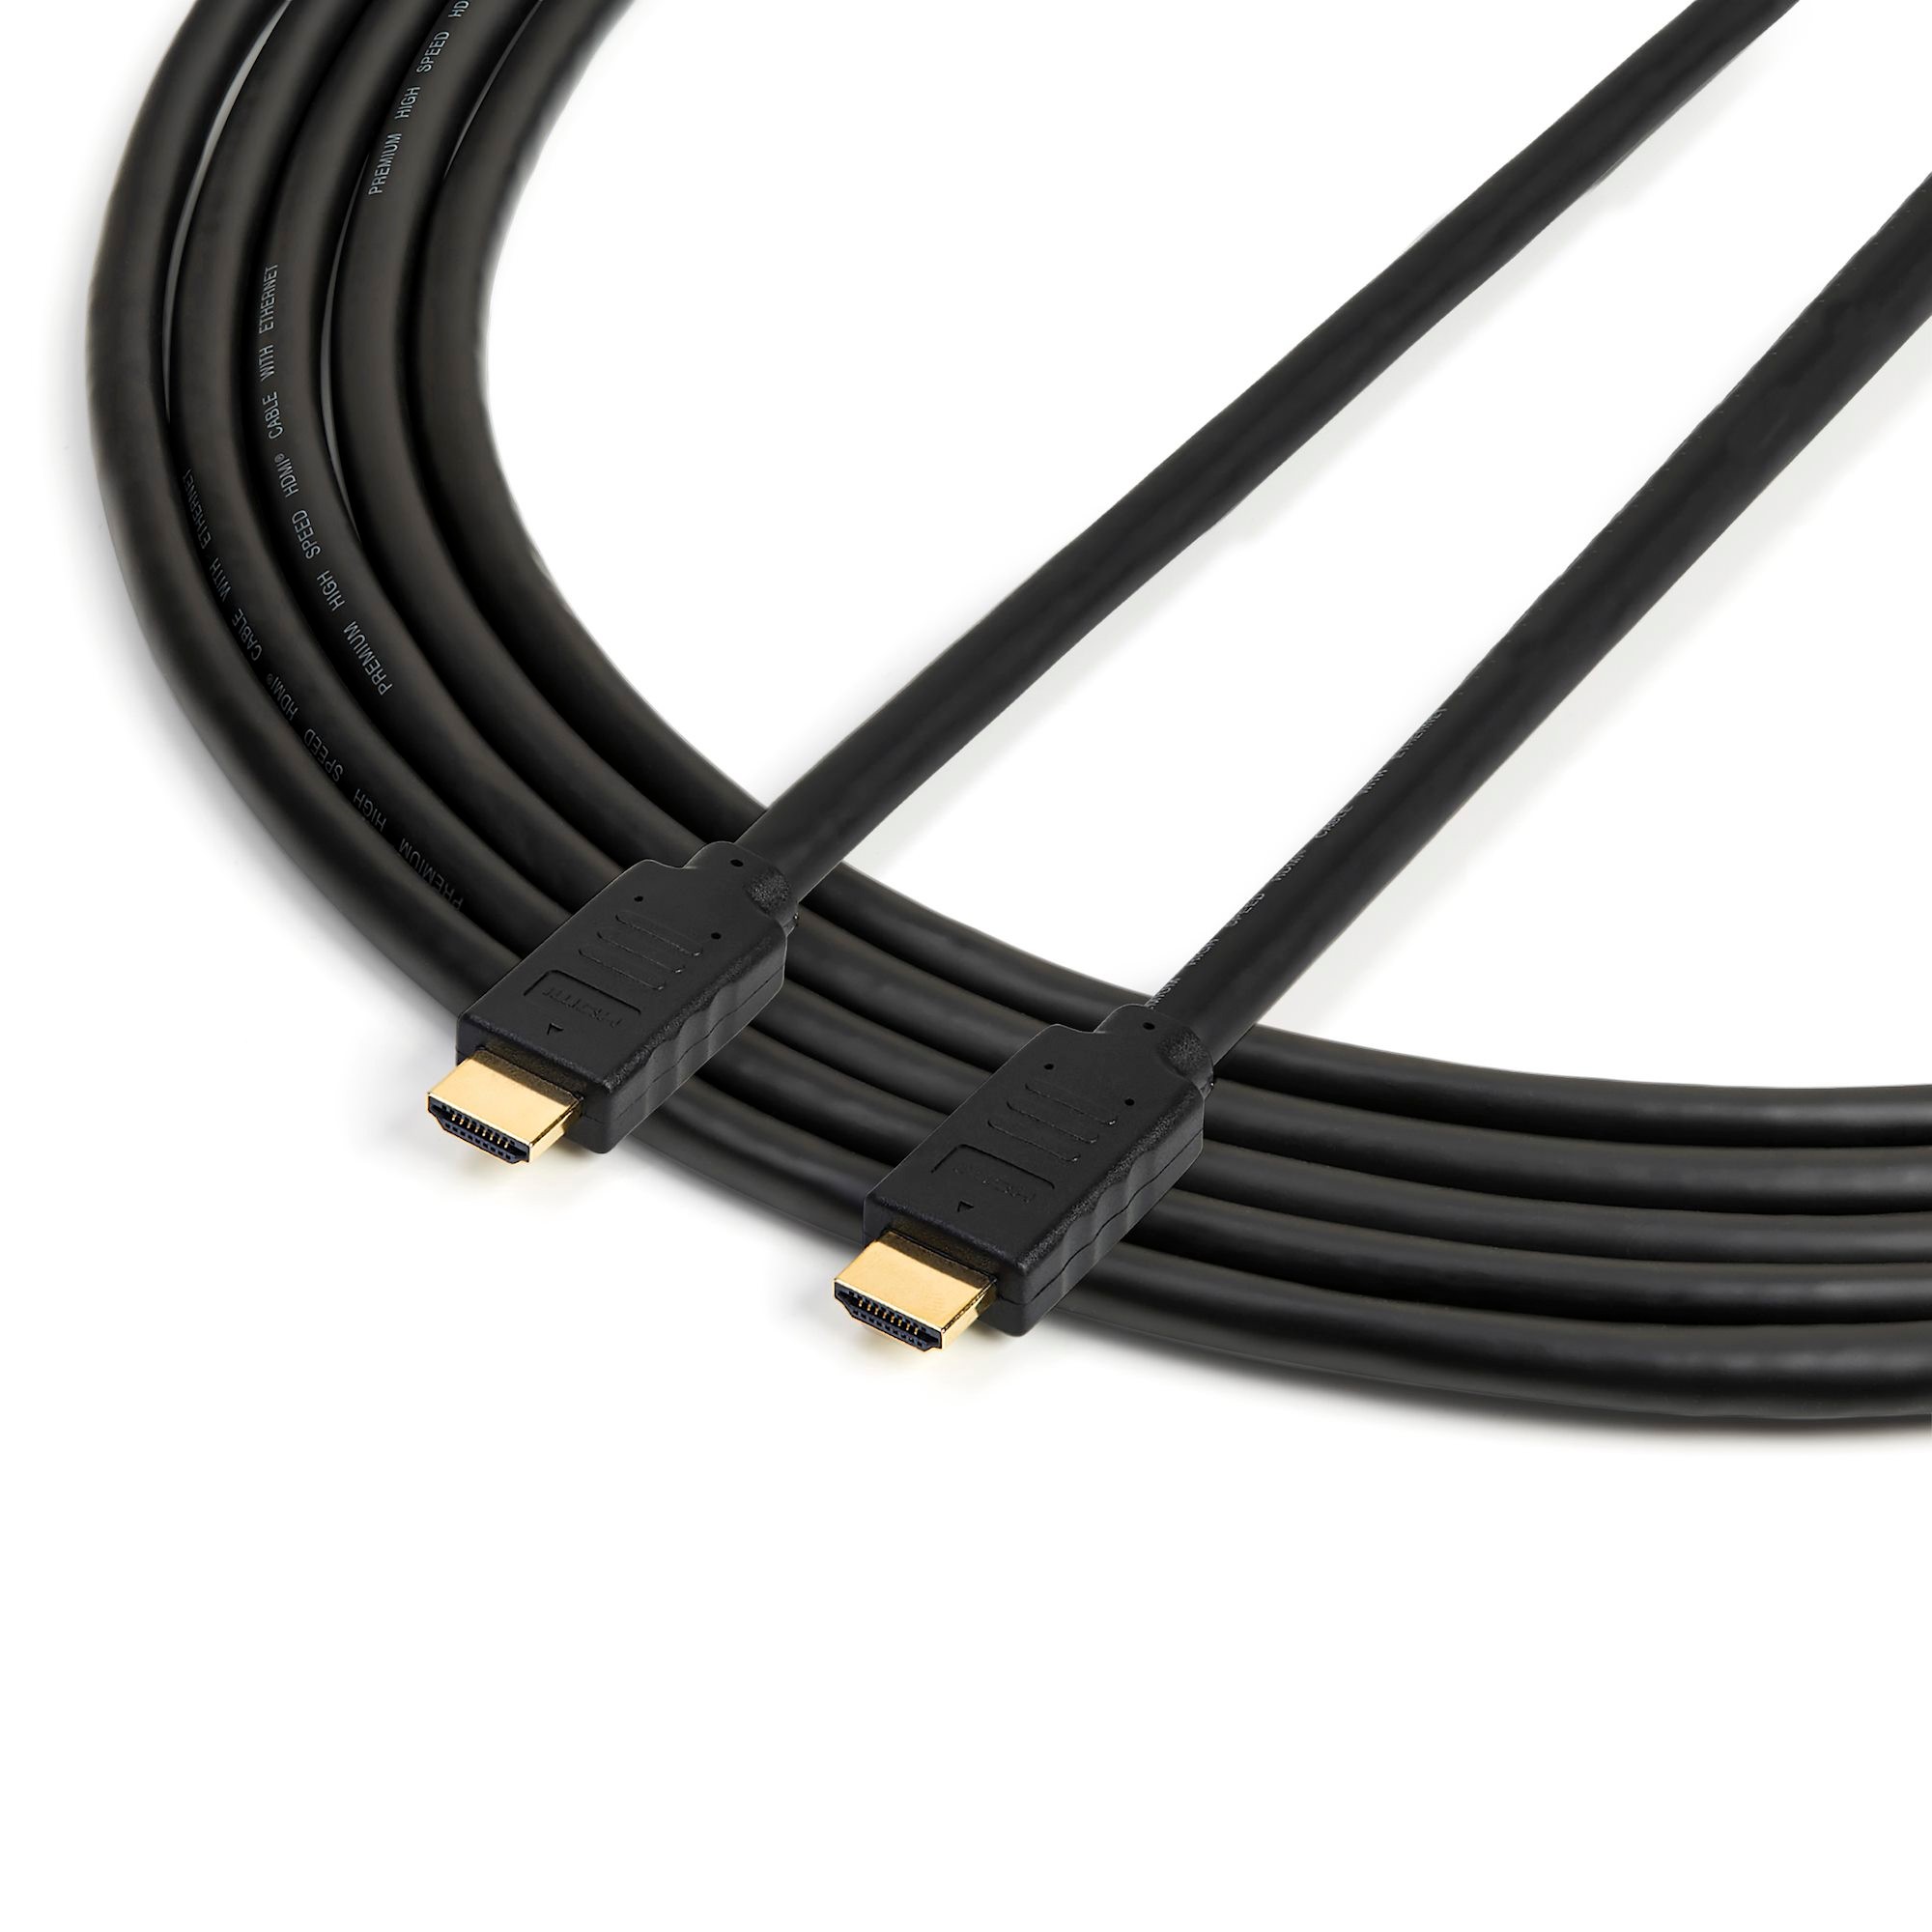 2m (6ft) Slim HDMI Cable with Locking Screw - 4K 60Hz HDR - High Speed HDMI  2.0 Monitor Cable with Locking Screw Connector for Secure Connection 